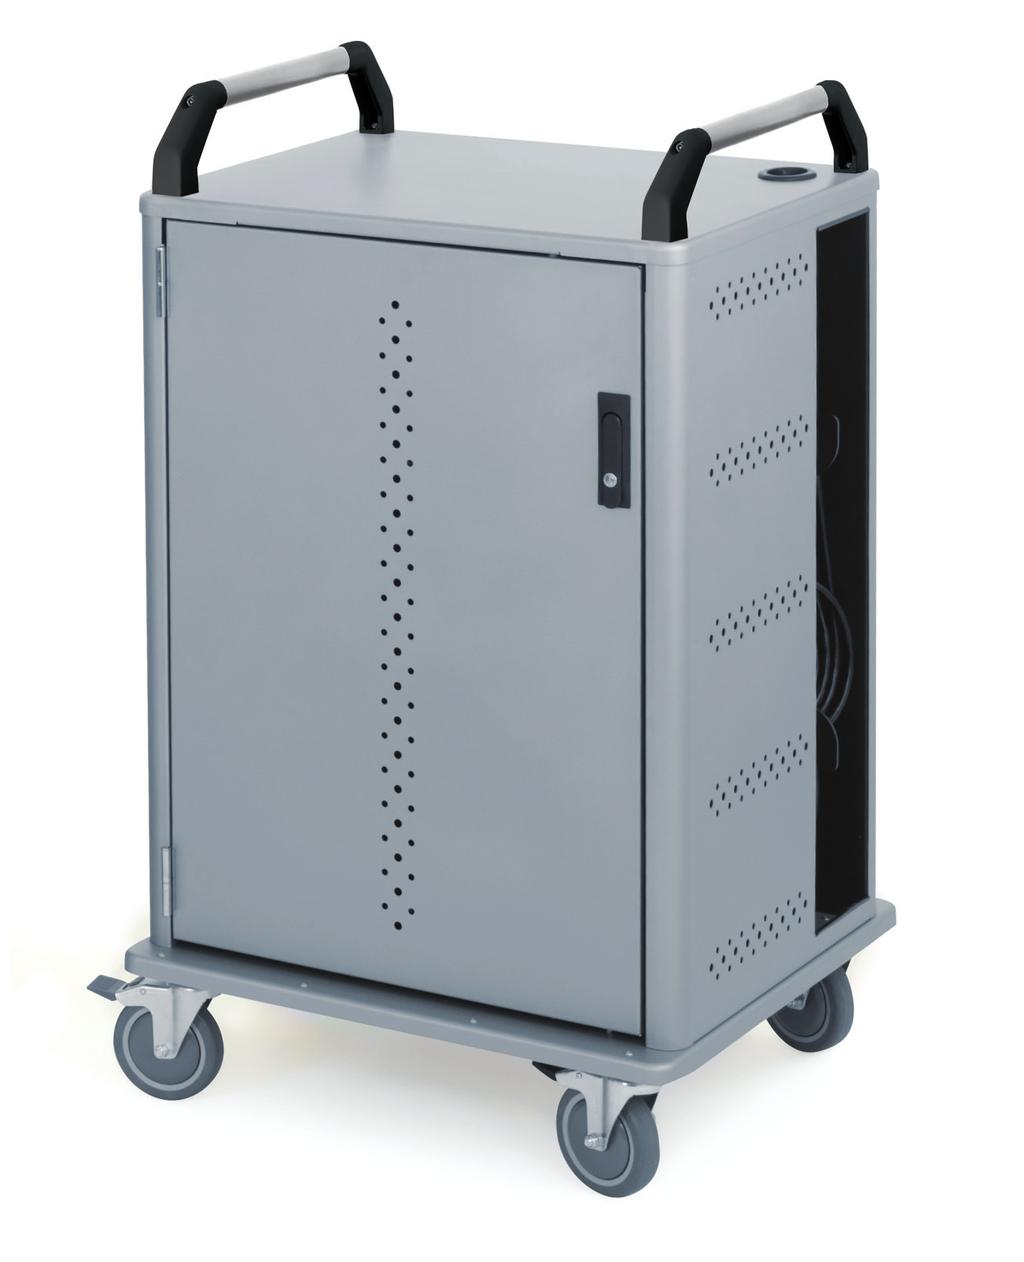 Advanced Netbook Charging Carts for 10 laptops or 20 netbooks Owners Manual TECHNOLOGY FURNITURE Hello! Thank you for choosing Anthro. This unit has been tested to Underwriters Laboratories U.S.